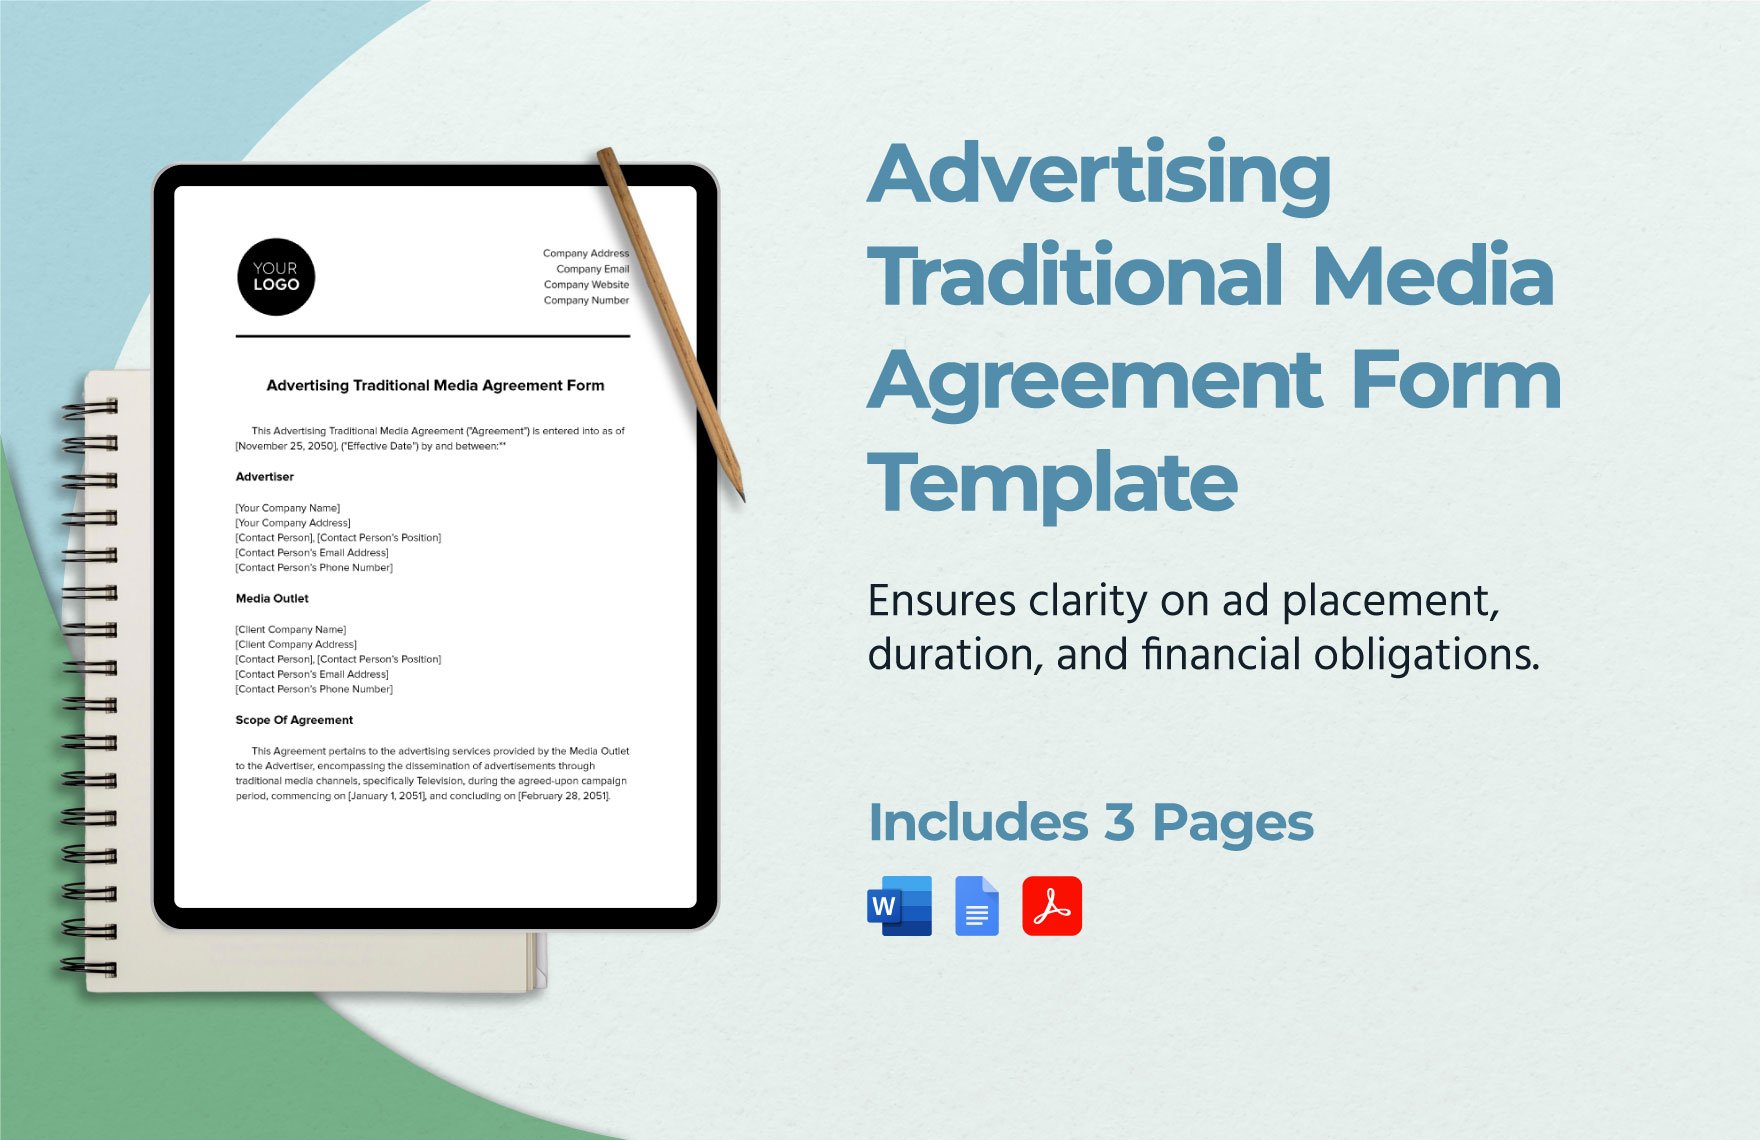 Advertising Traditional Media Agreement Form Template